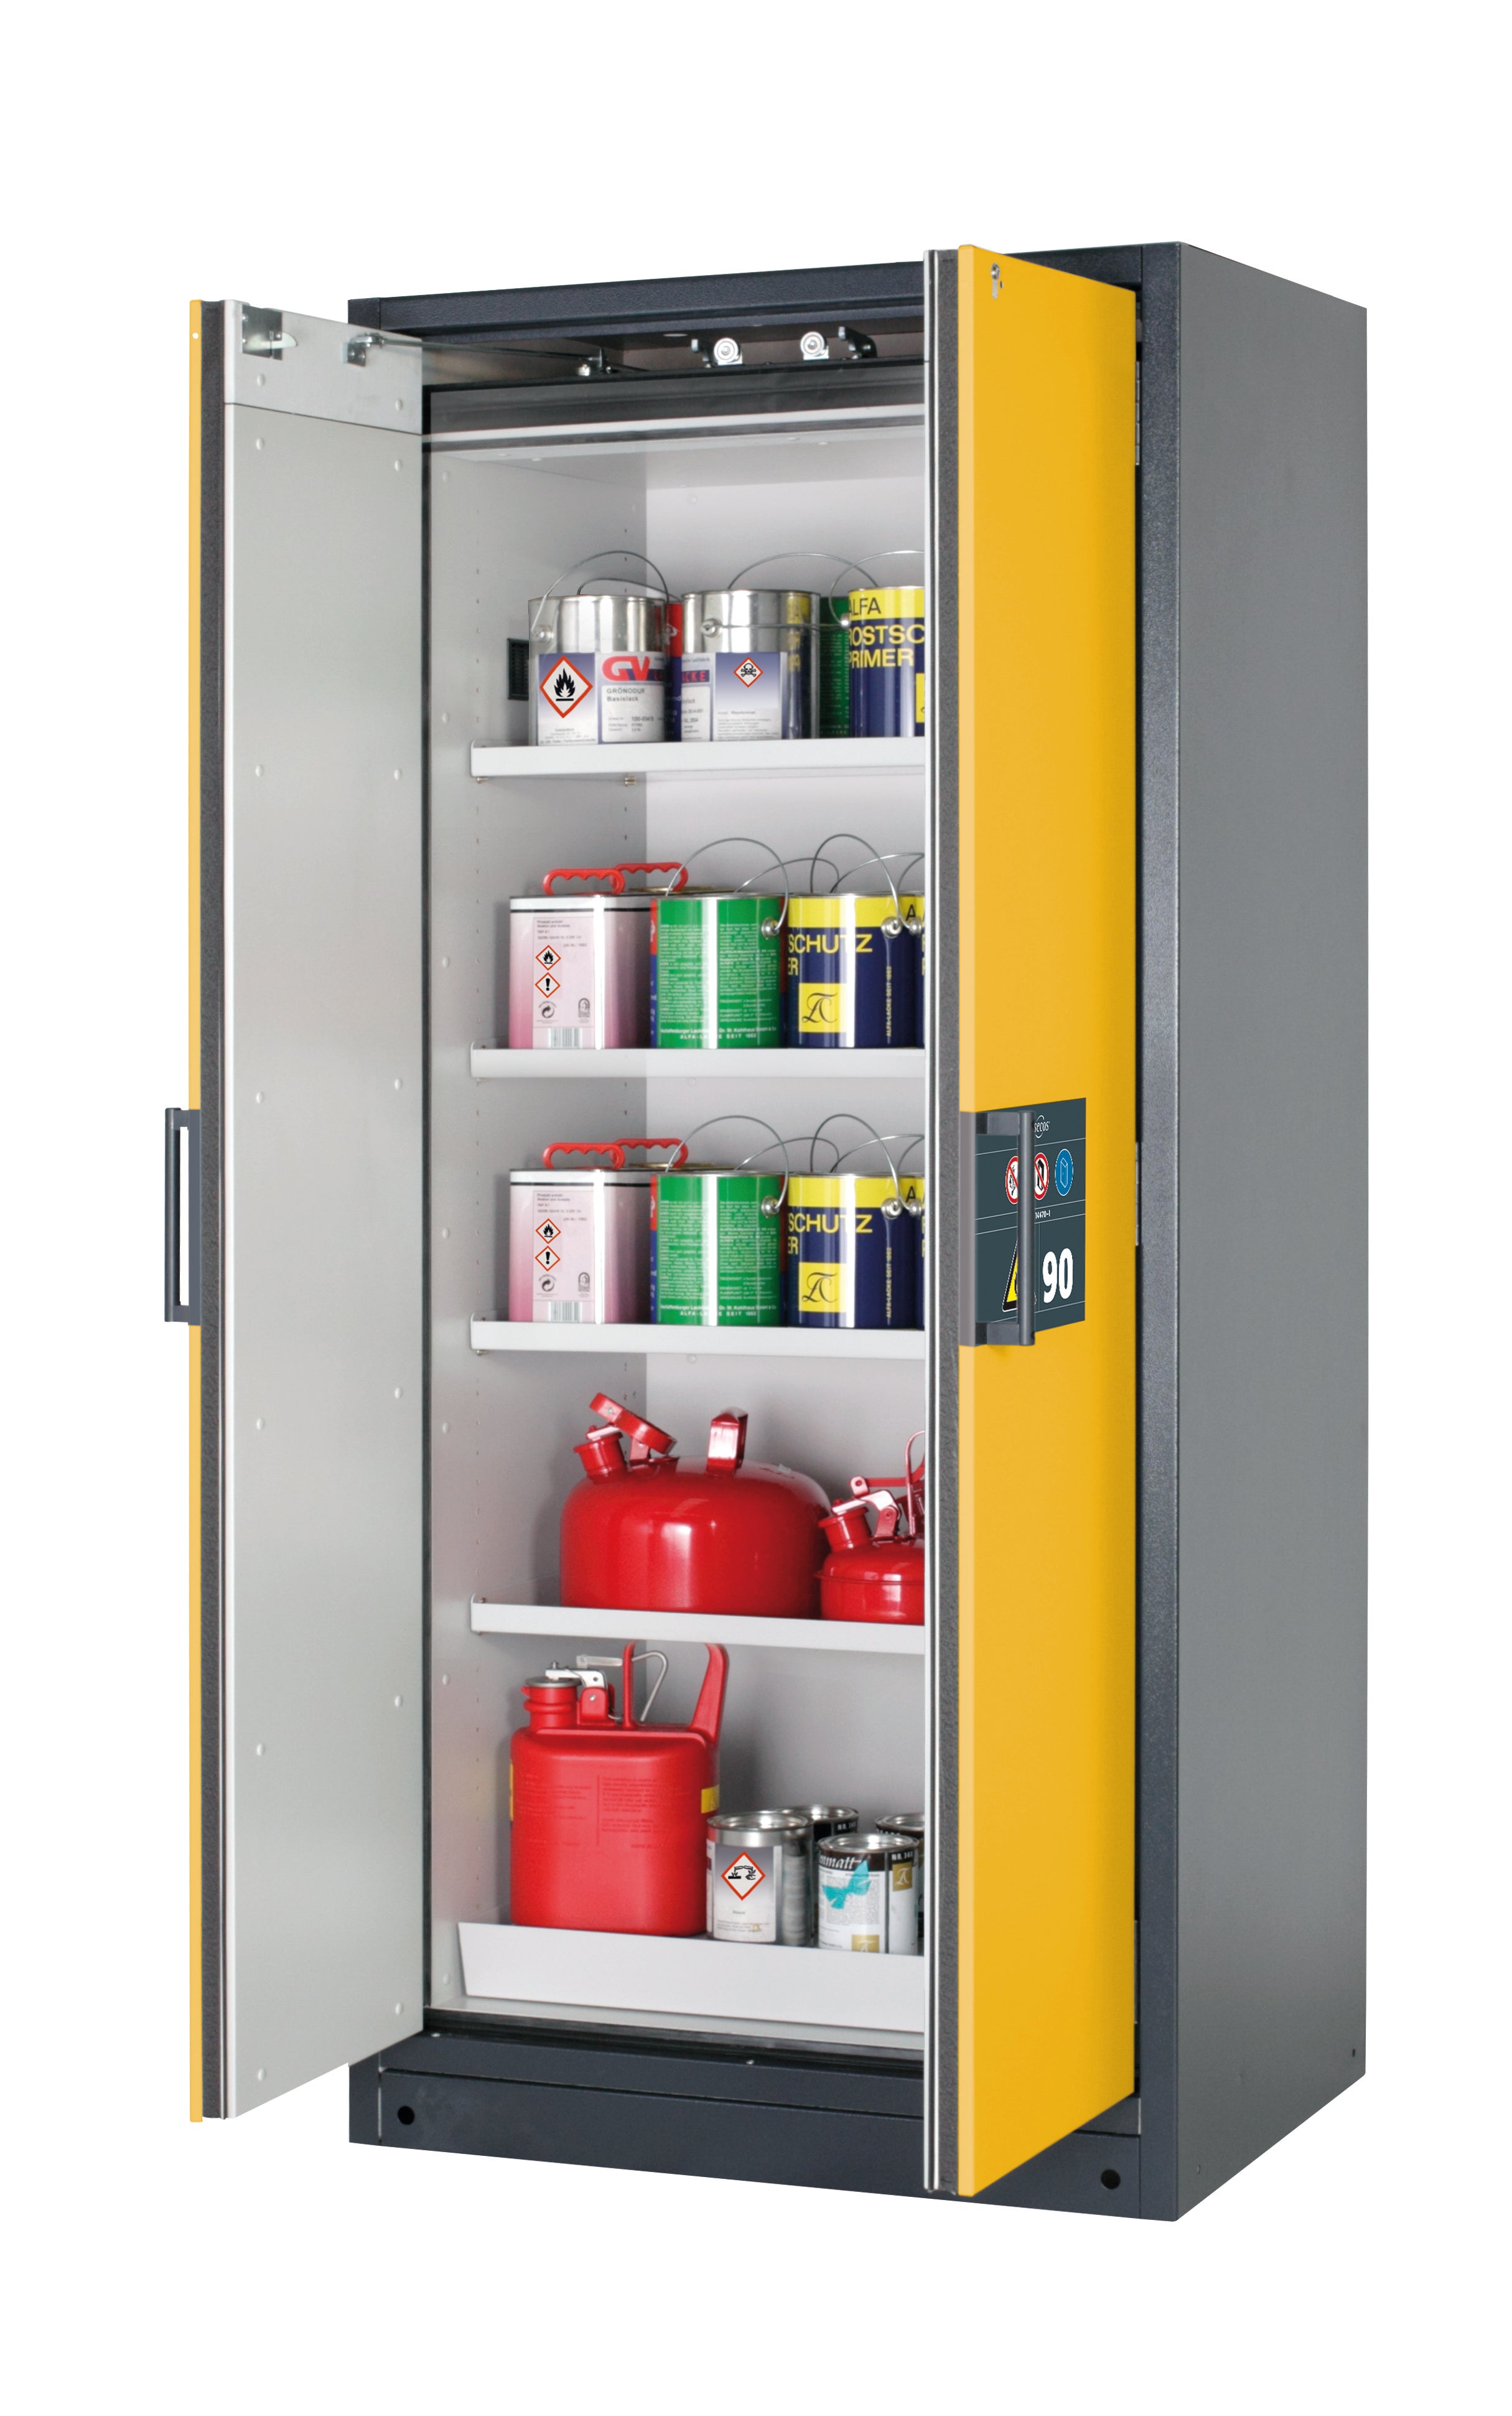 Type 90 safety storage cabinet Q-CLASSIC-90 model Q90.195.090 in warning yellow RAL 1004 with 4x shelf standard (sheet steel),